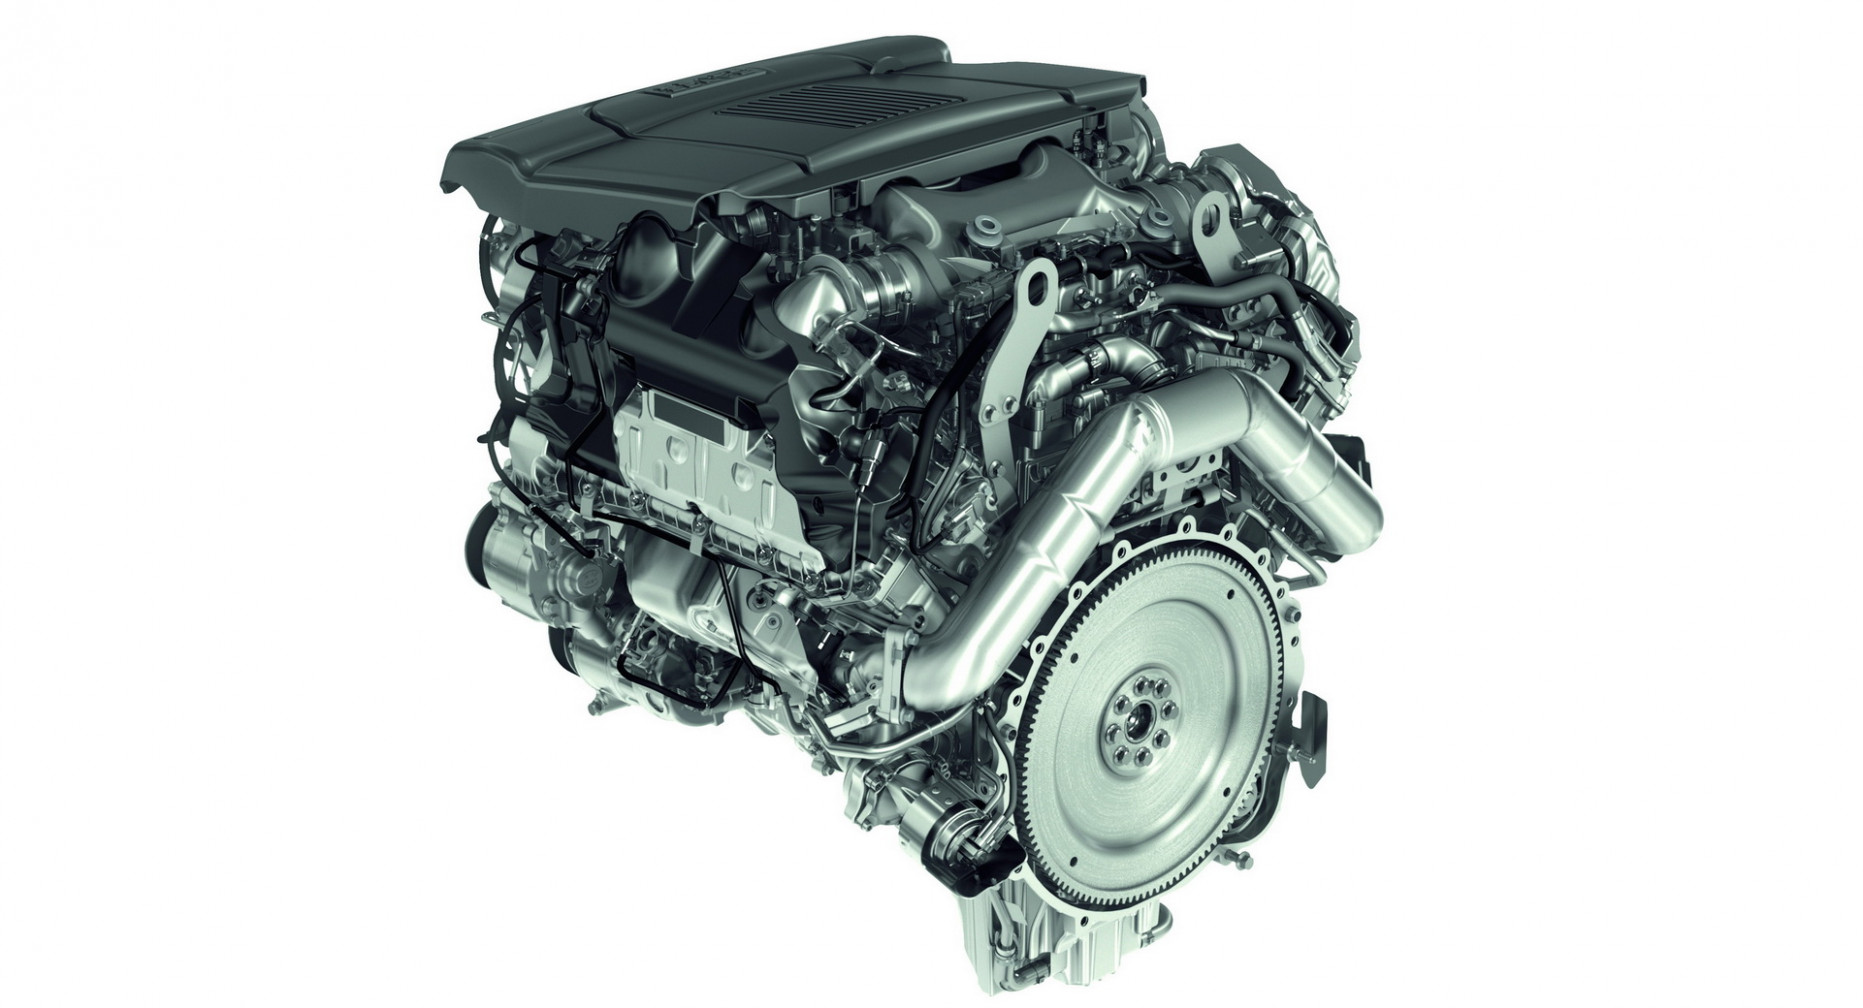 Redesign and Review range rover sport engine